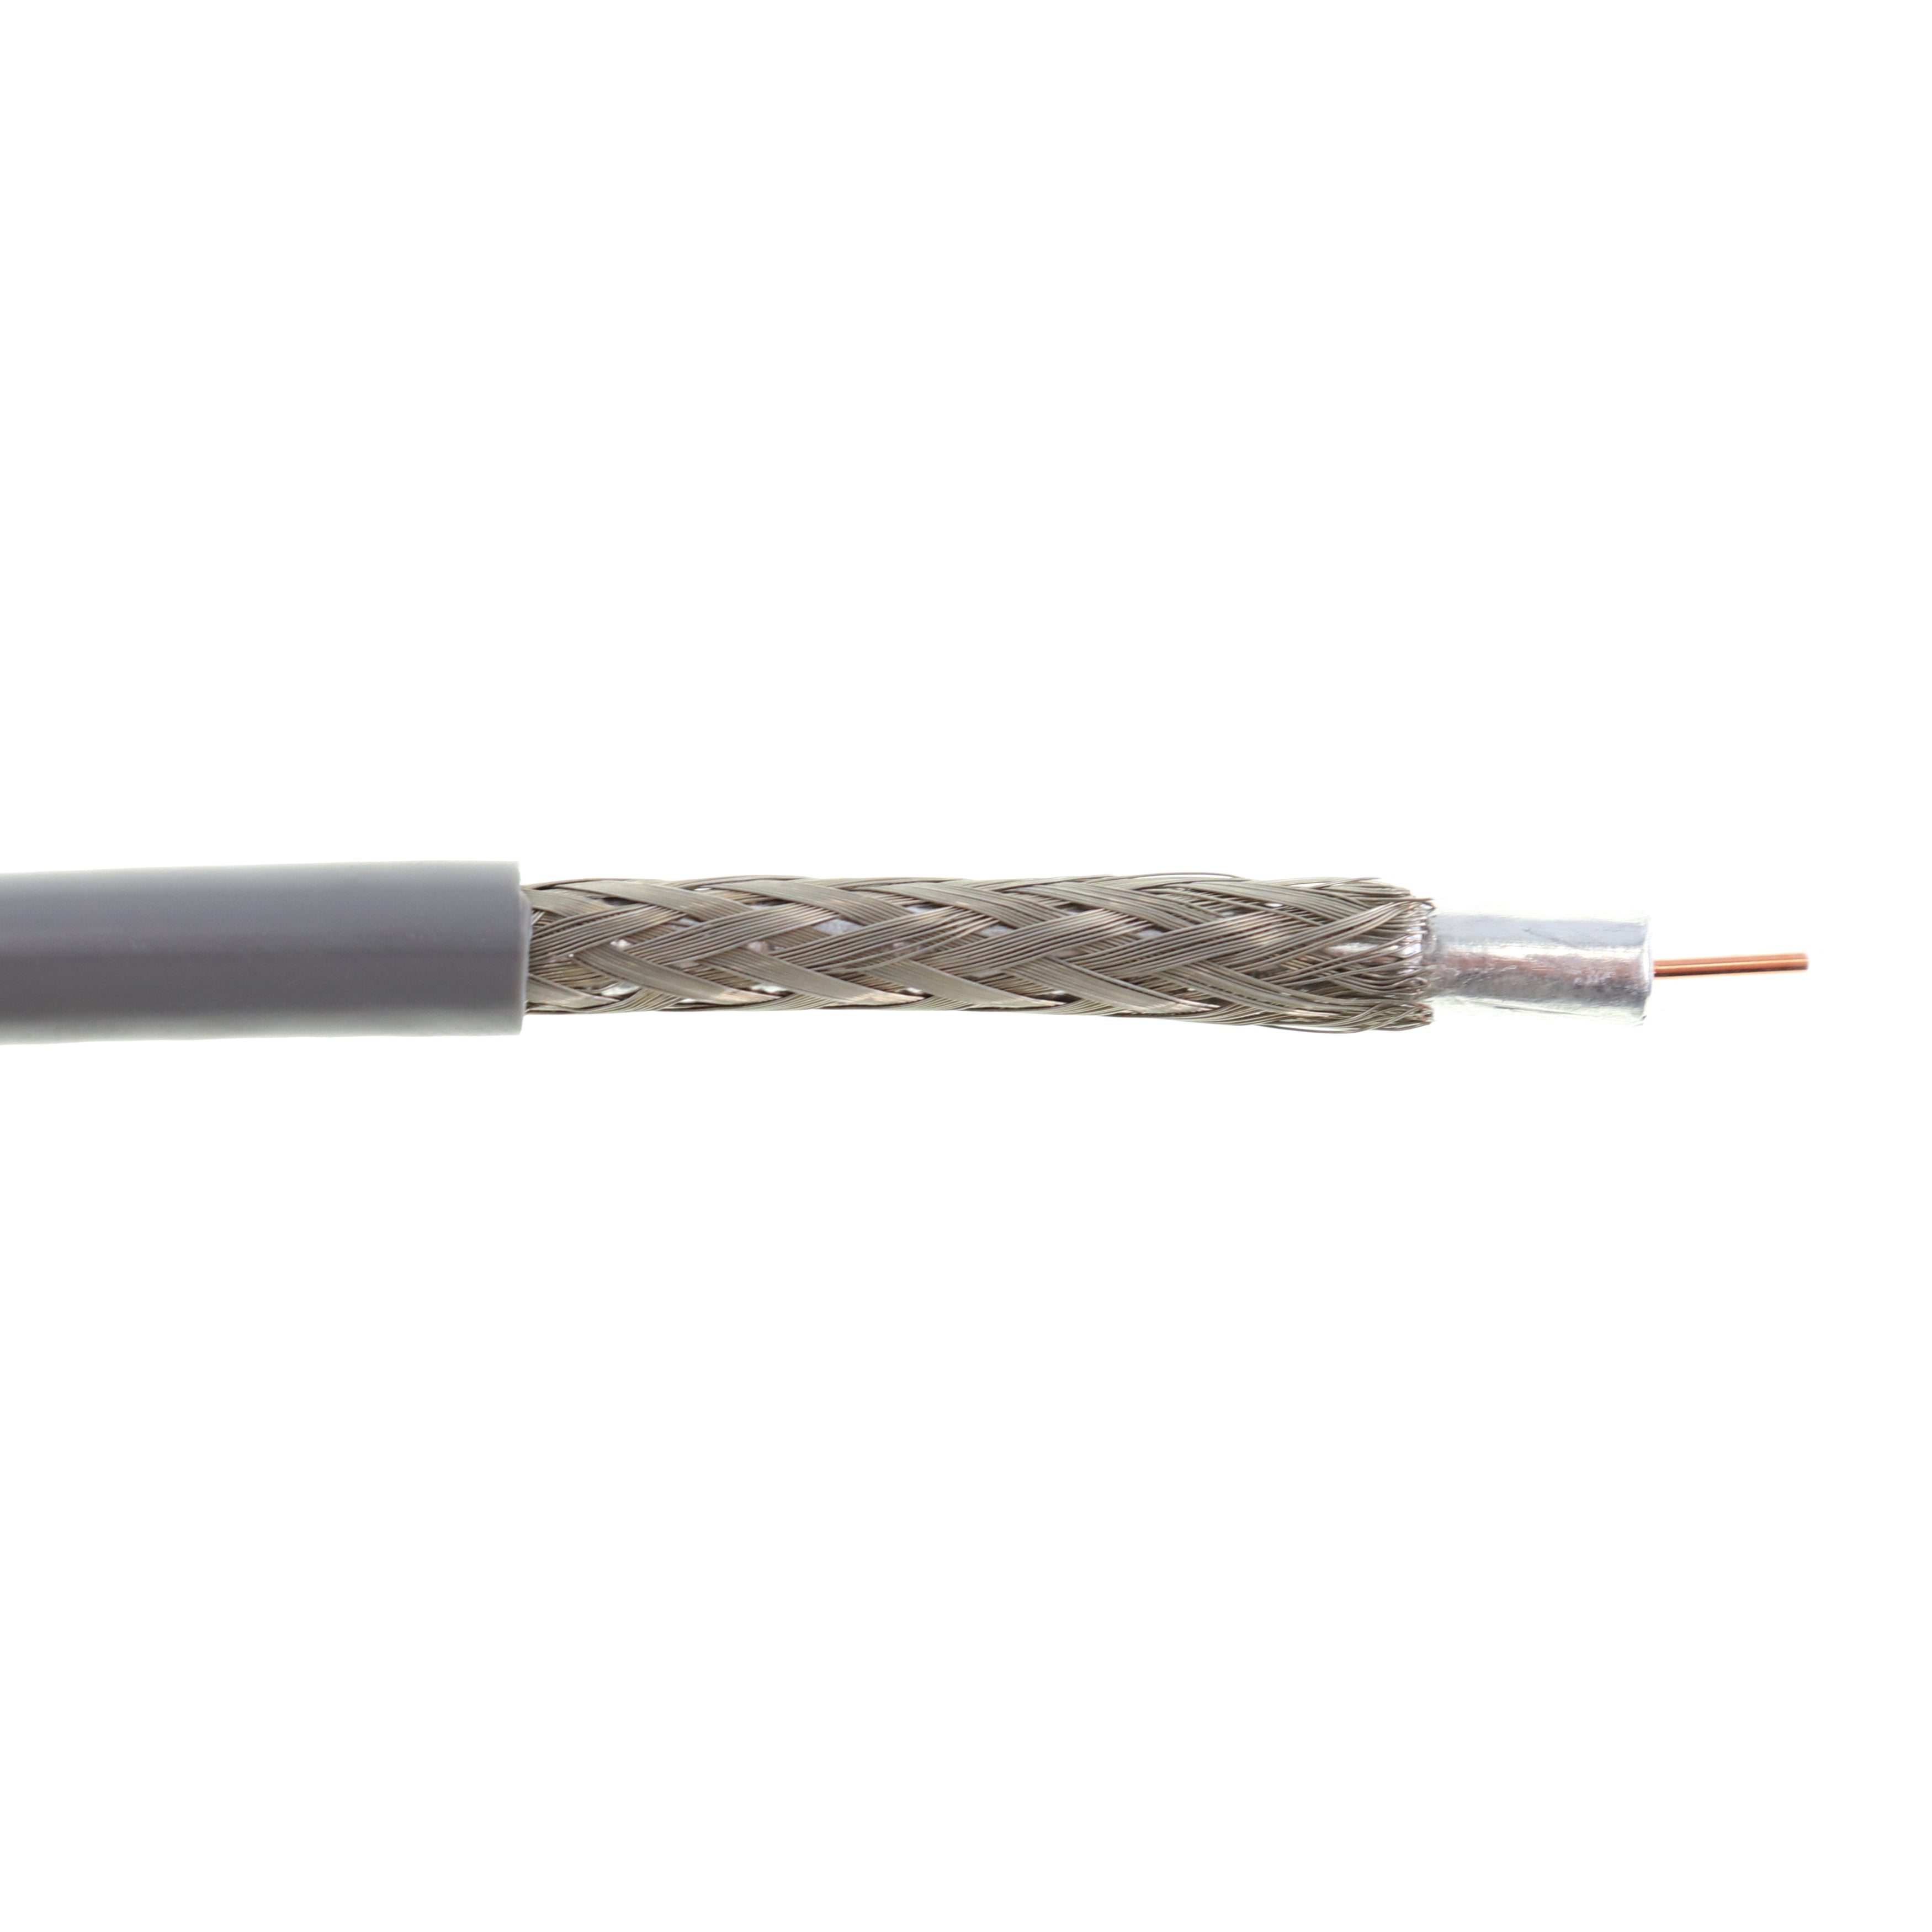 Belden, BELDEN 734A1 COAXIAL INTERCONNECT CABLE, 734A SERIES, 20-AWG, 75-OHM, CMR/CMG, G